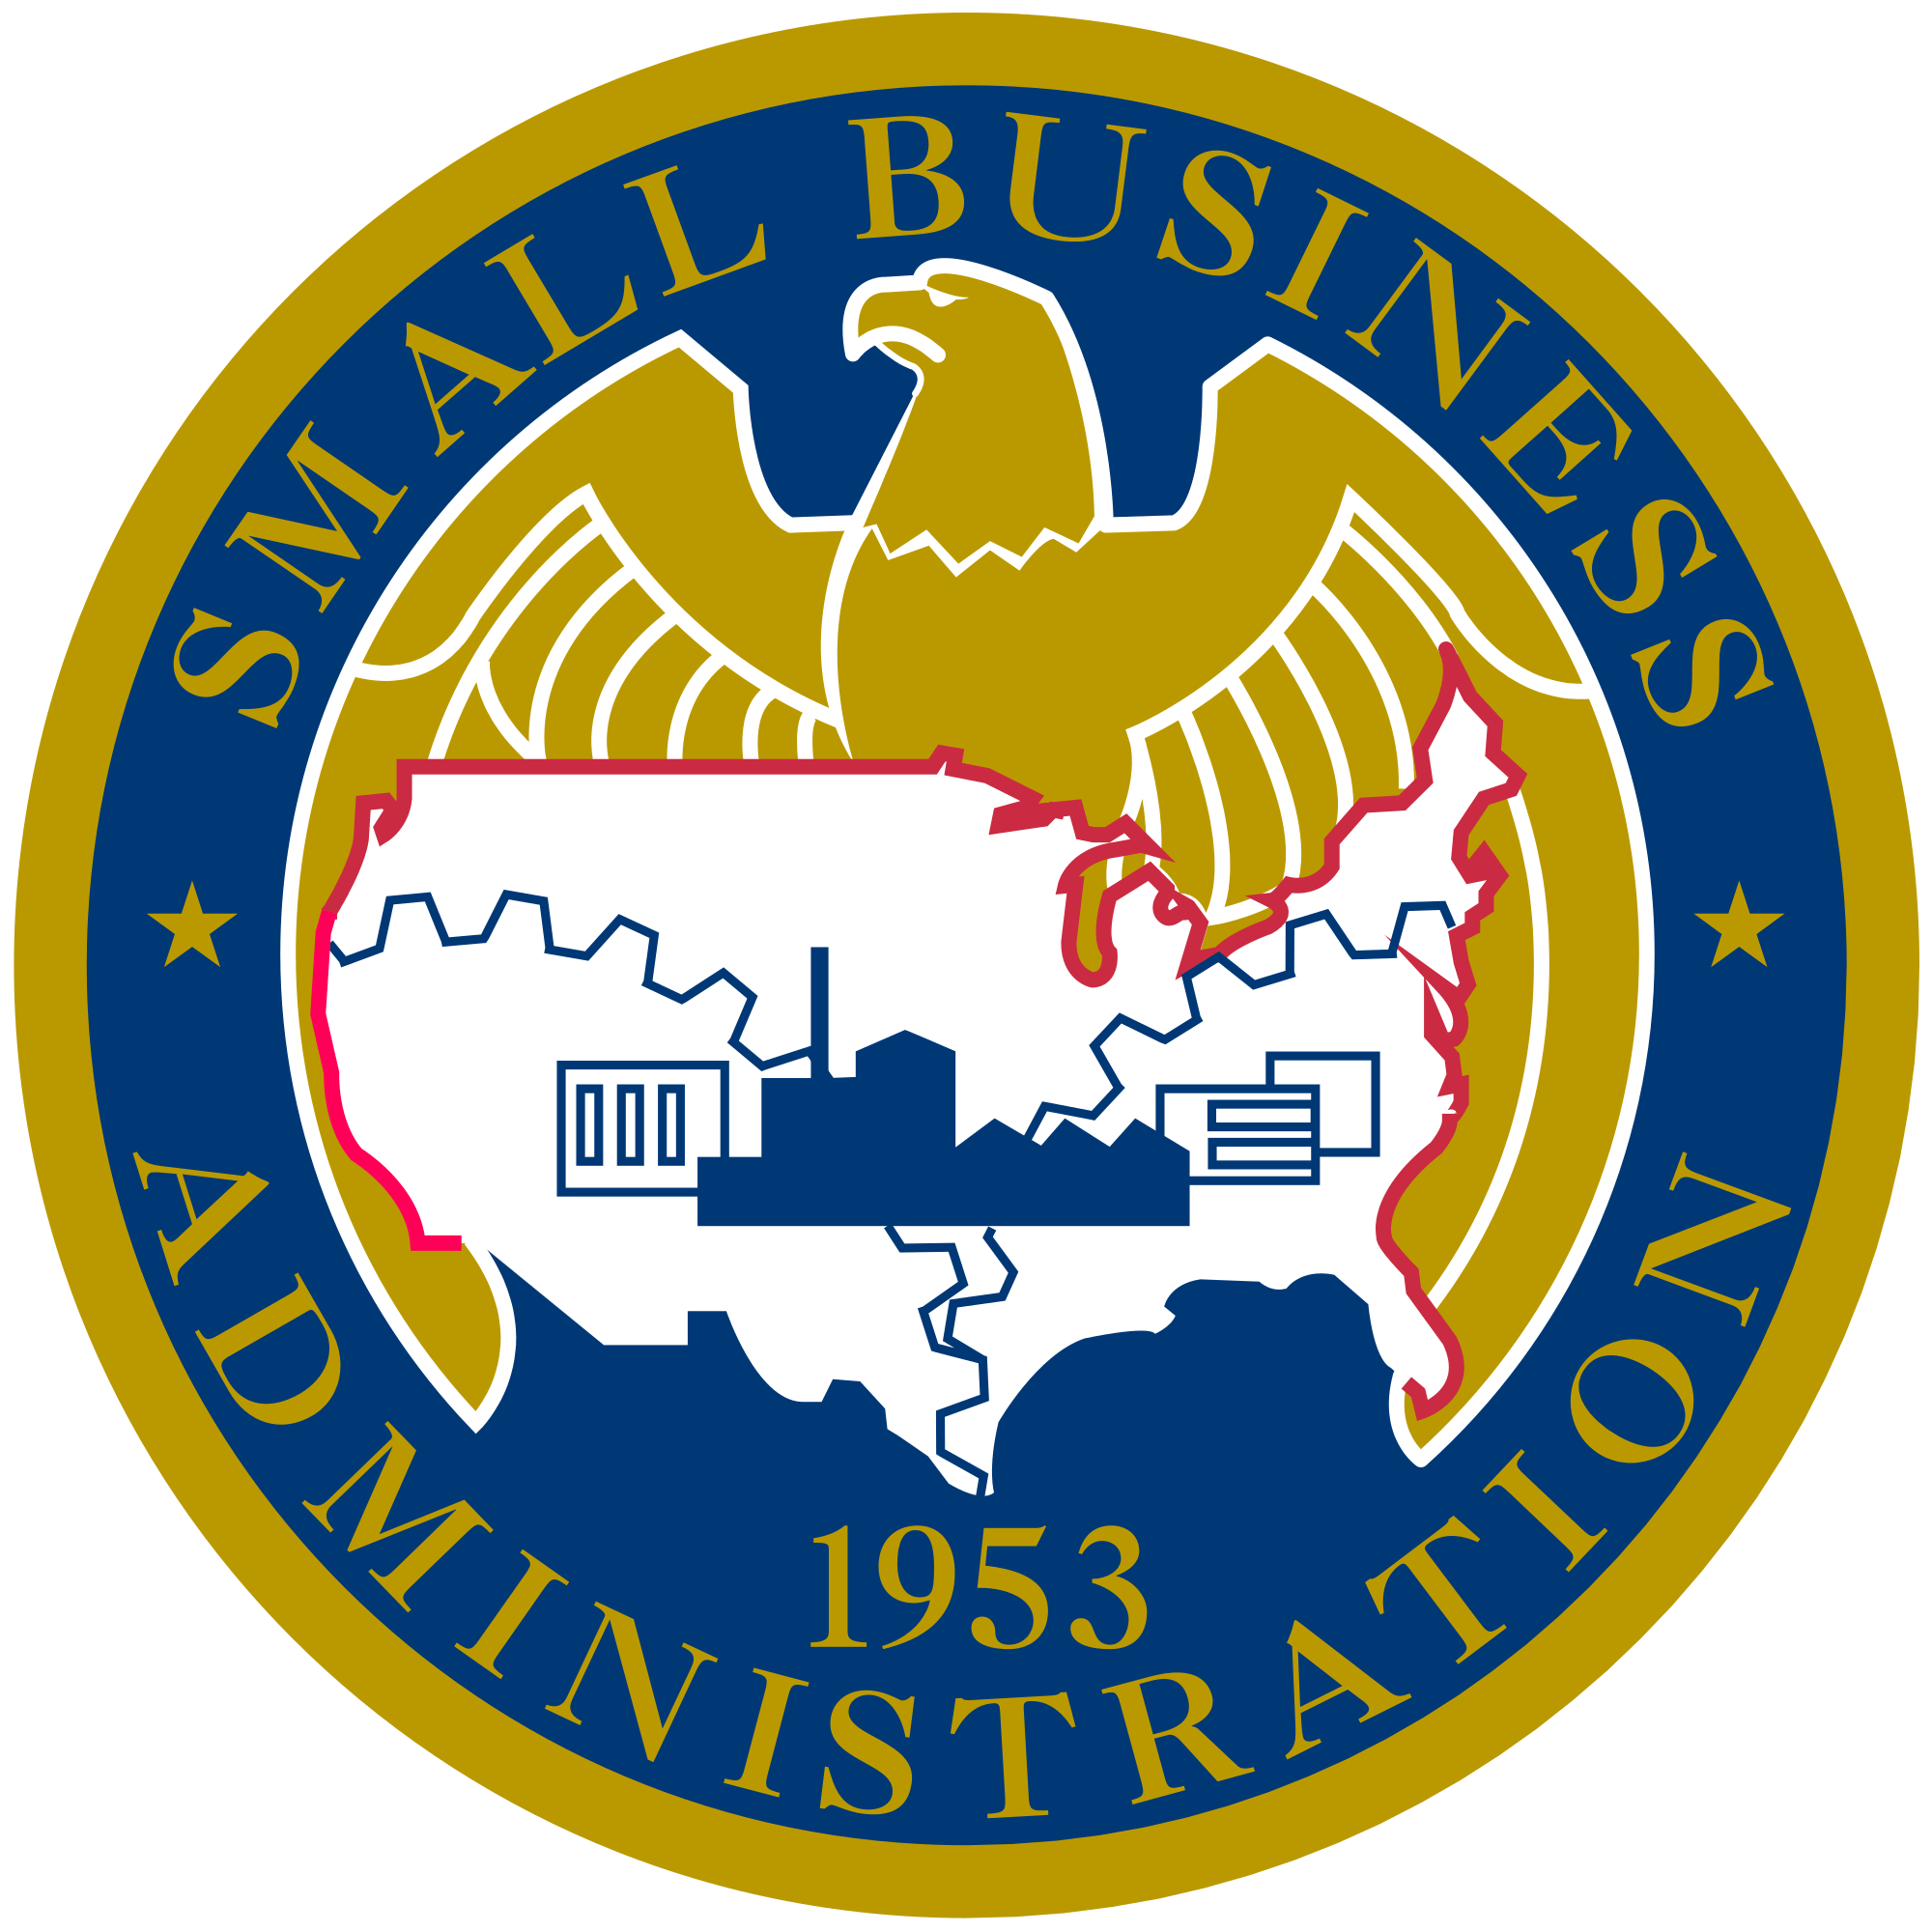 United States Business Logo - File:Seal of the United States Small Business Administration.svg ...